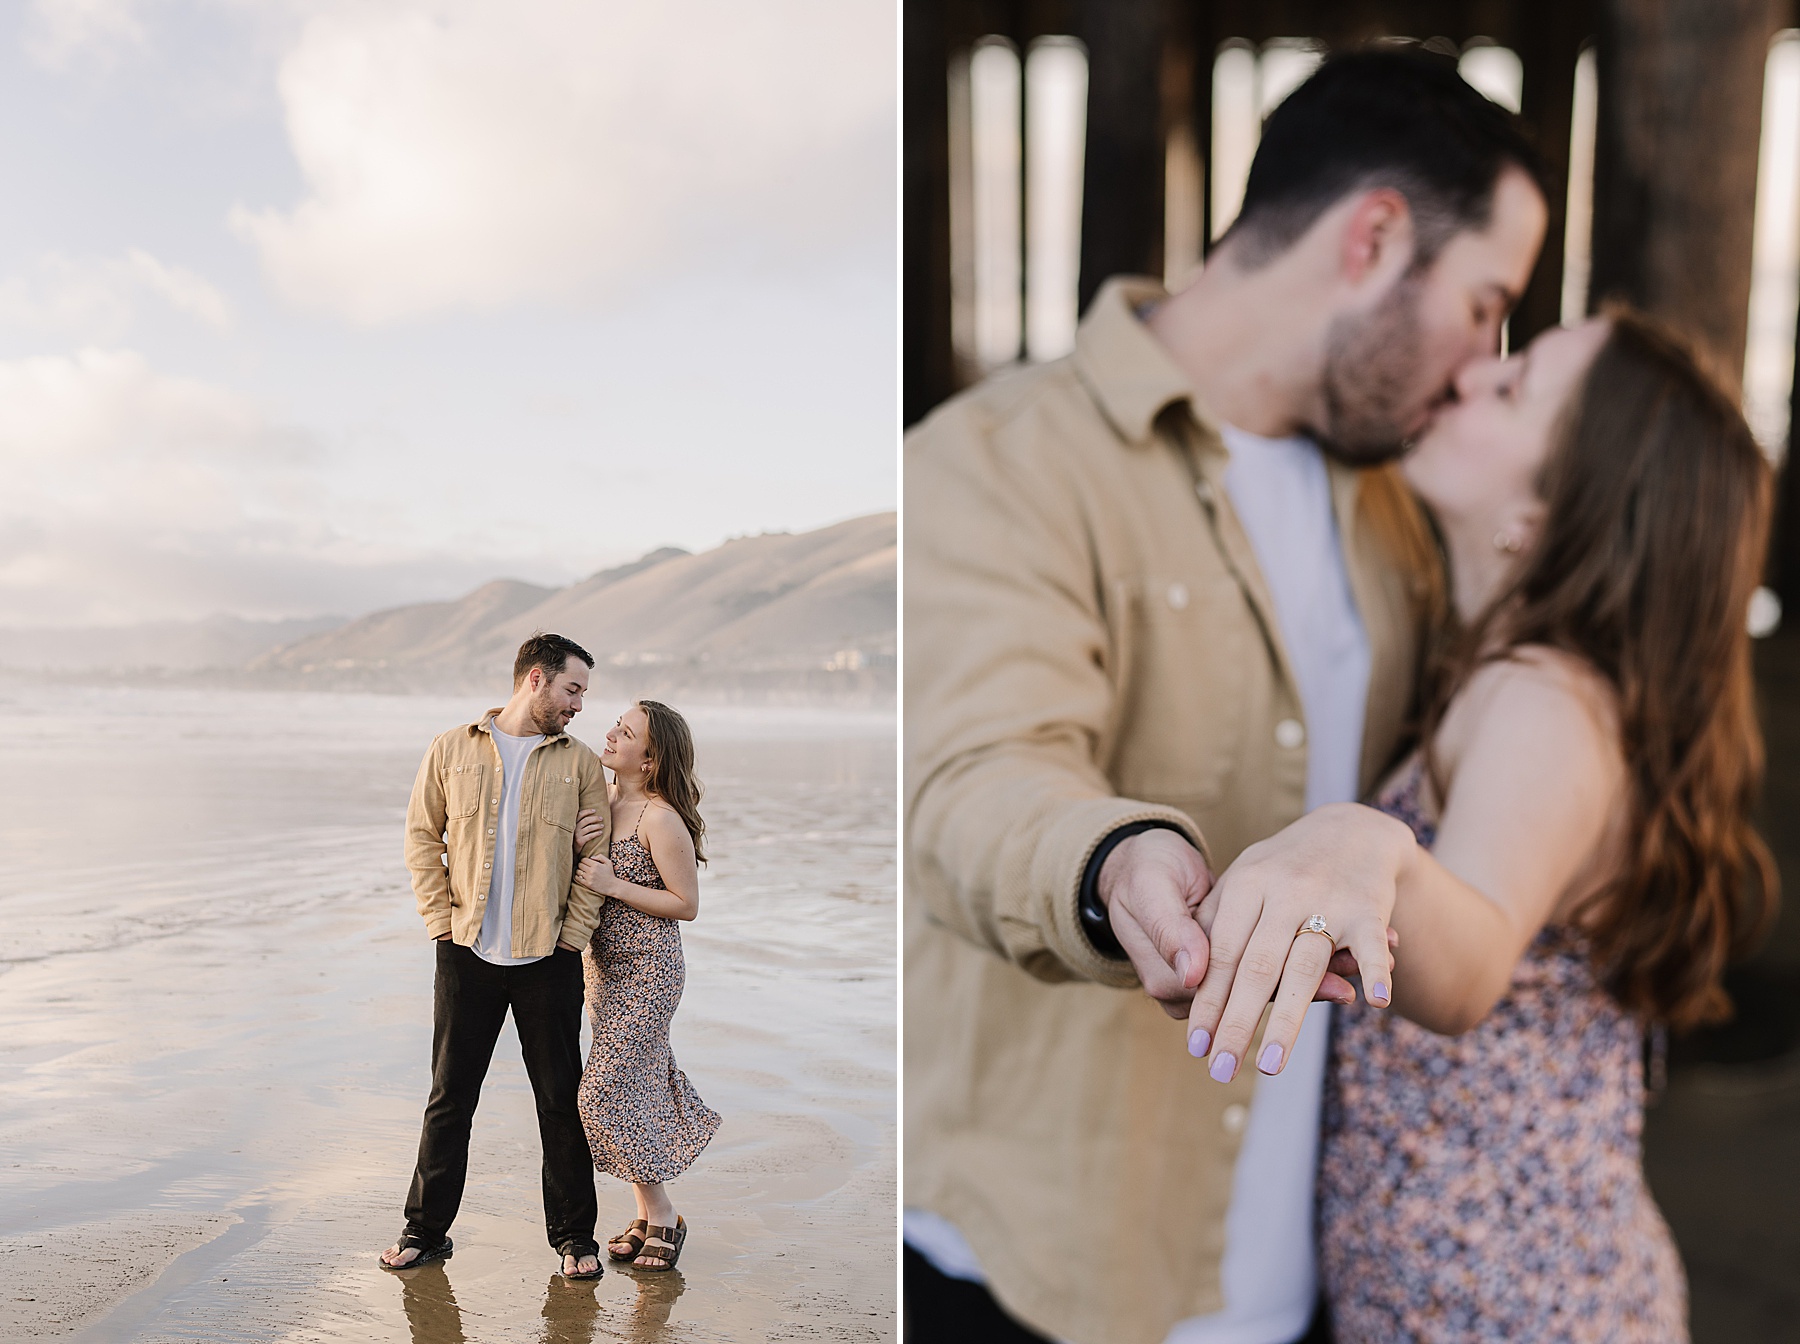 Engaged couple post with wedding ring on SLO-county beach.